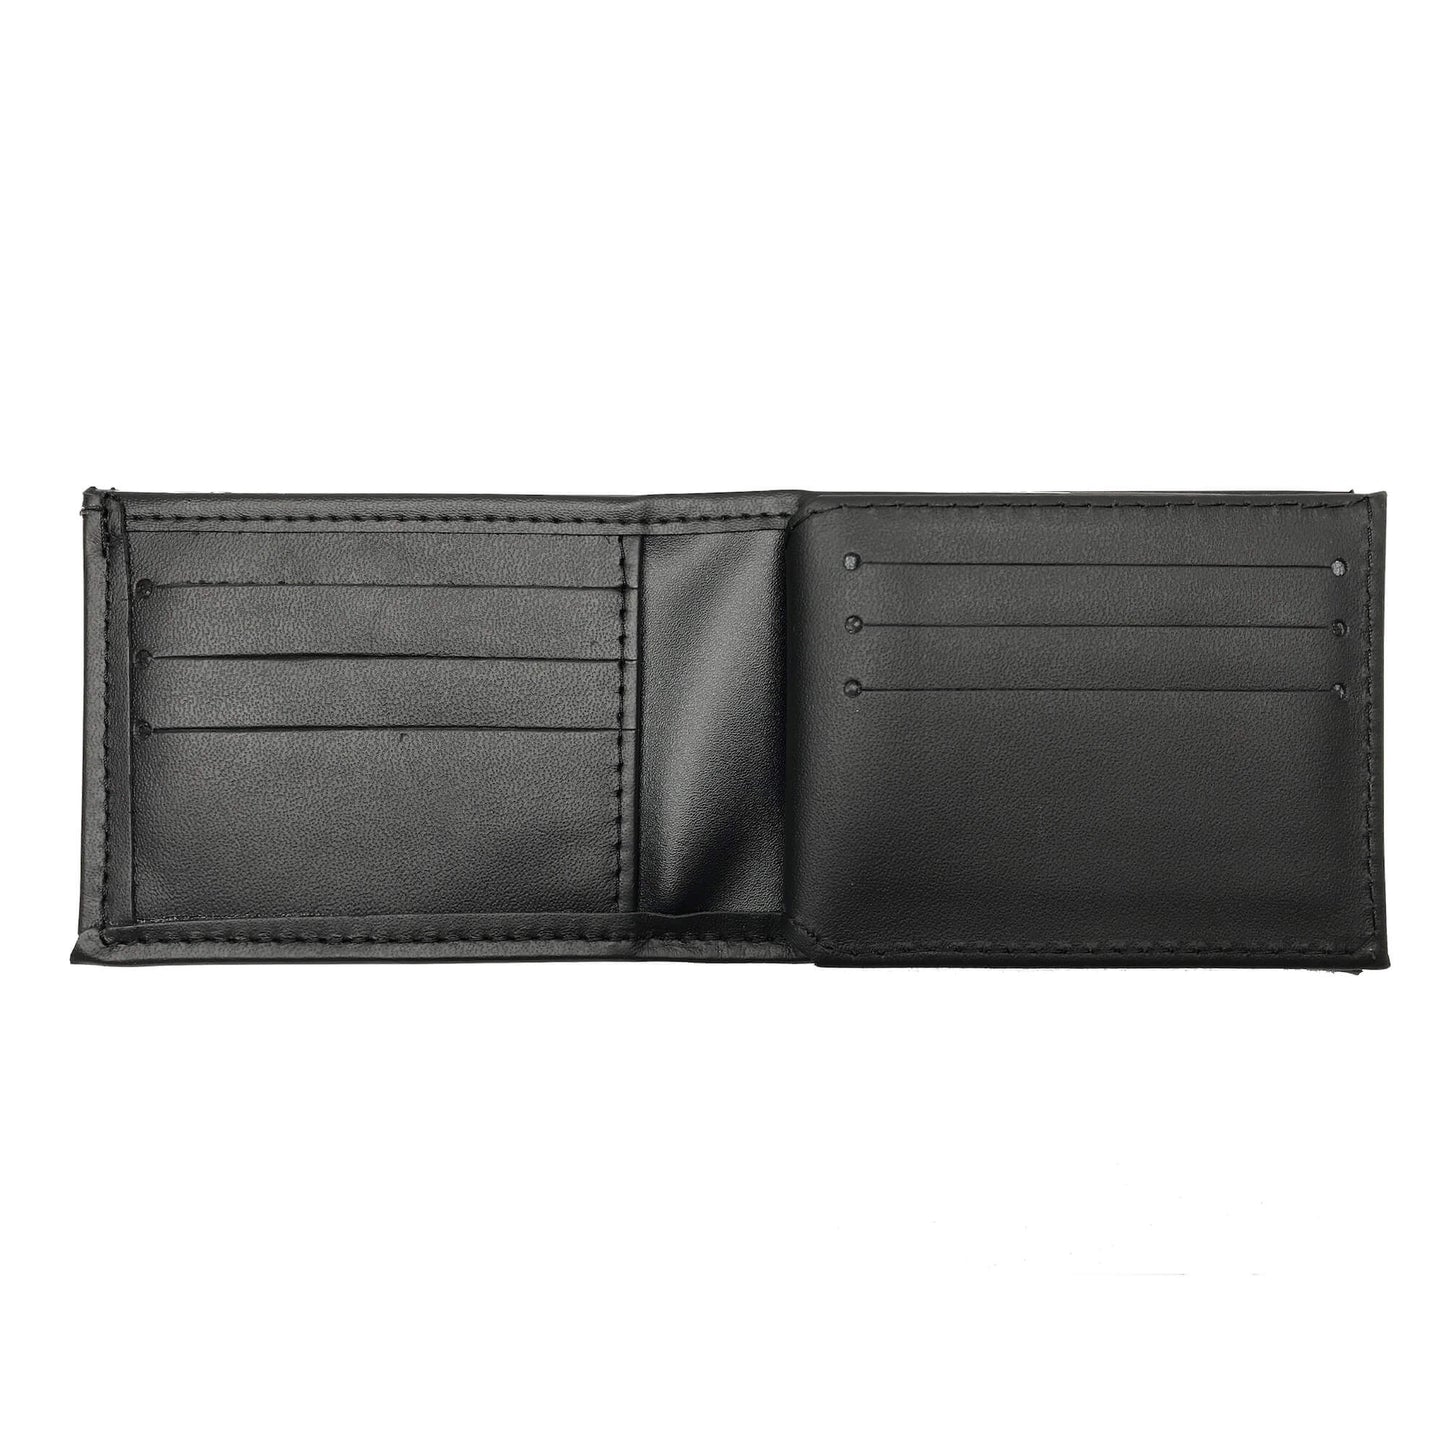 Port Authority of New York and New Jersey Horizontal Bifold Hidden Badge Wallet-Perfect Fit-911 Duty Gear USA